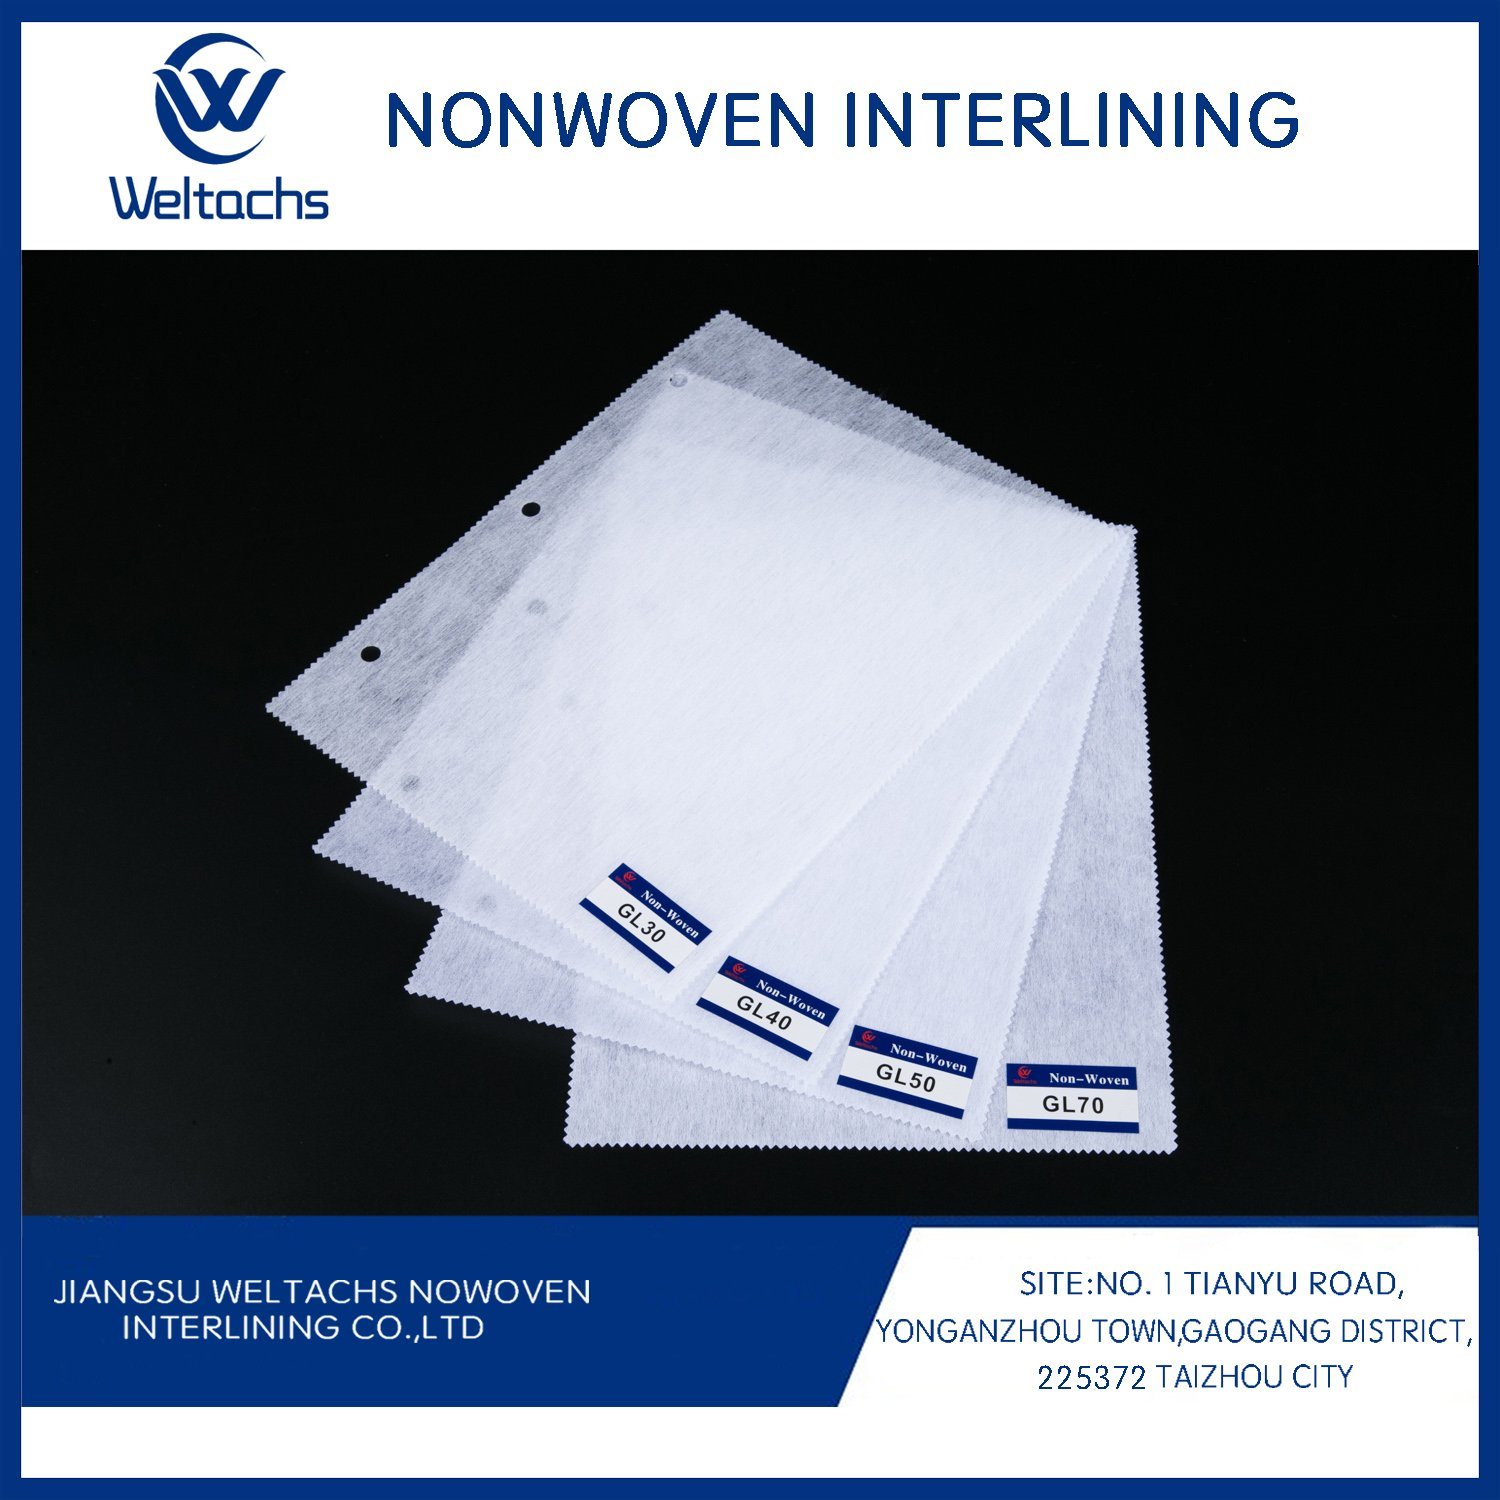 Market Hot Sale 1025hf Cut Away Fusing Embroidery Nonwoven Technics Chemical Bond Gum Stay Polyester Intelining 1035h